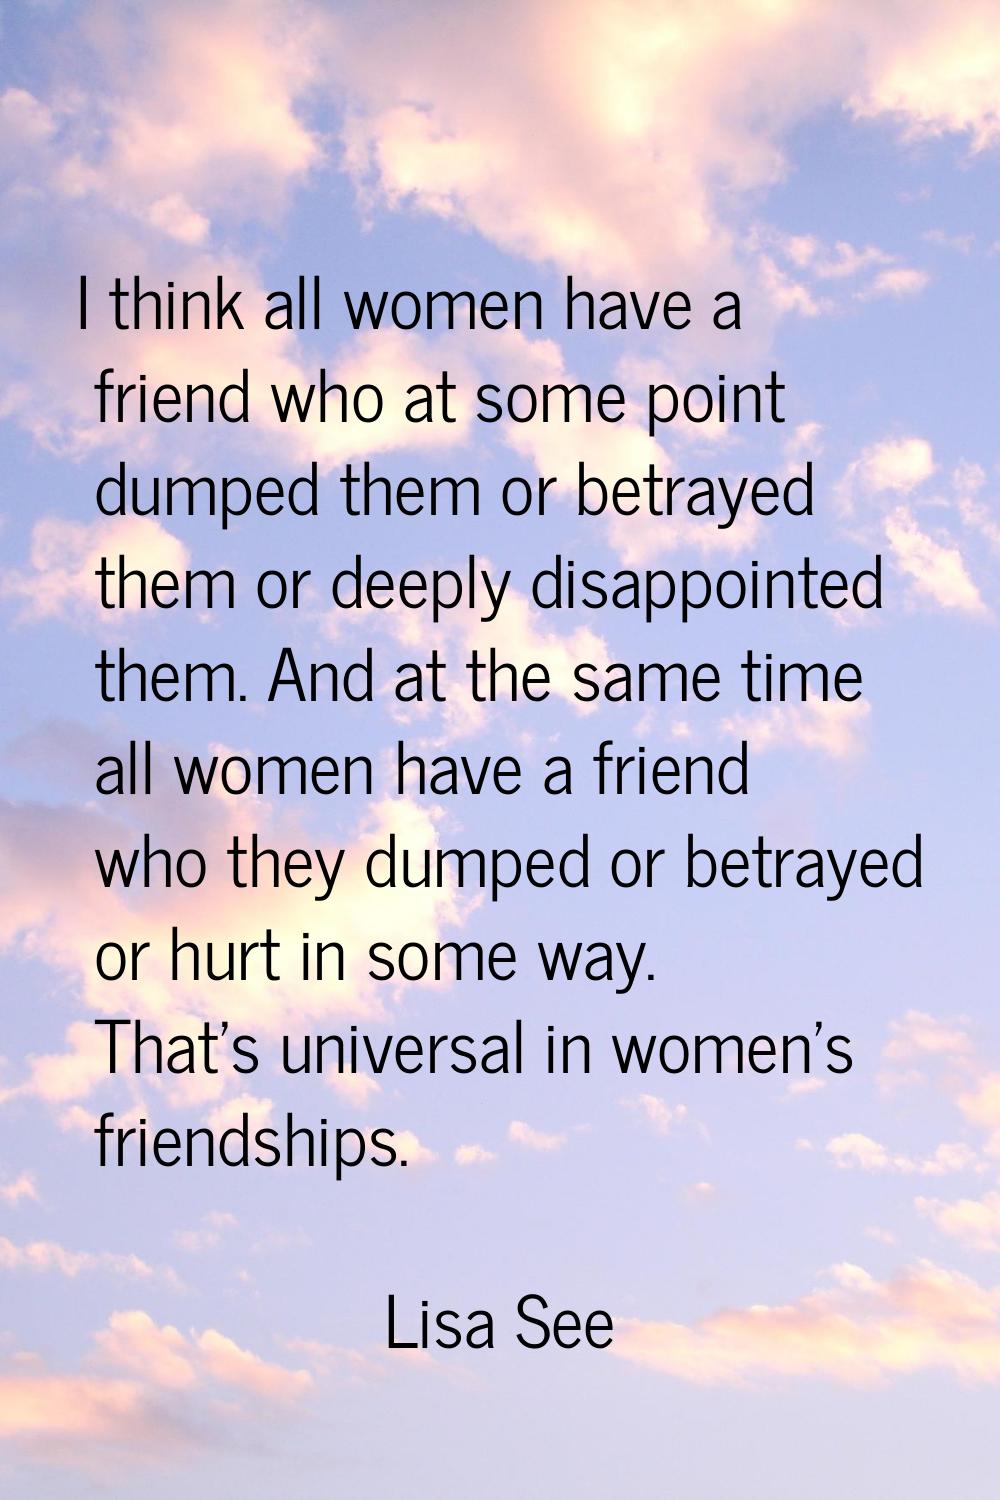 I think all women have a friend who at some point dumped them or betrayed them or deeply disappoint